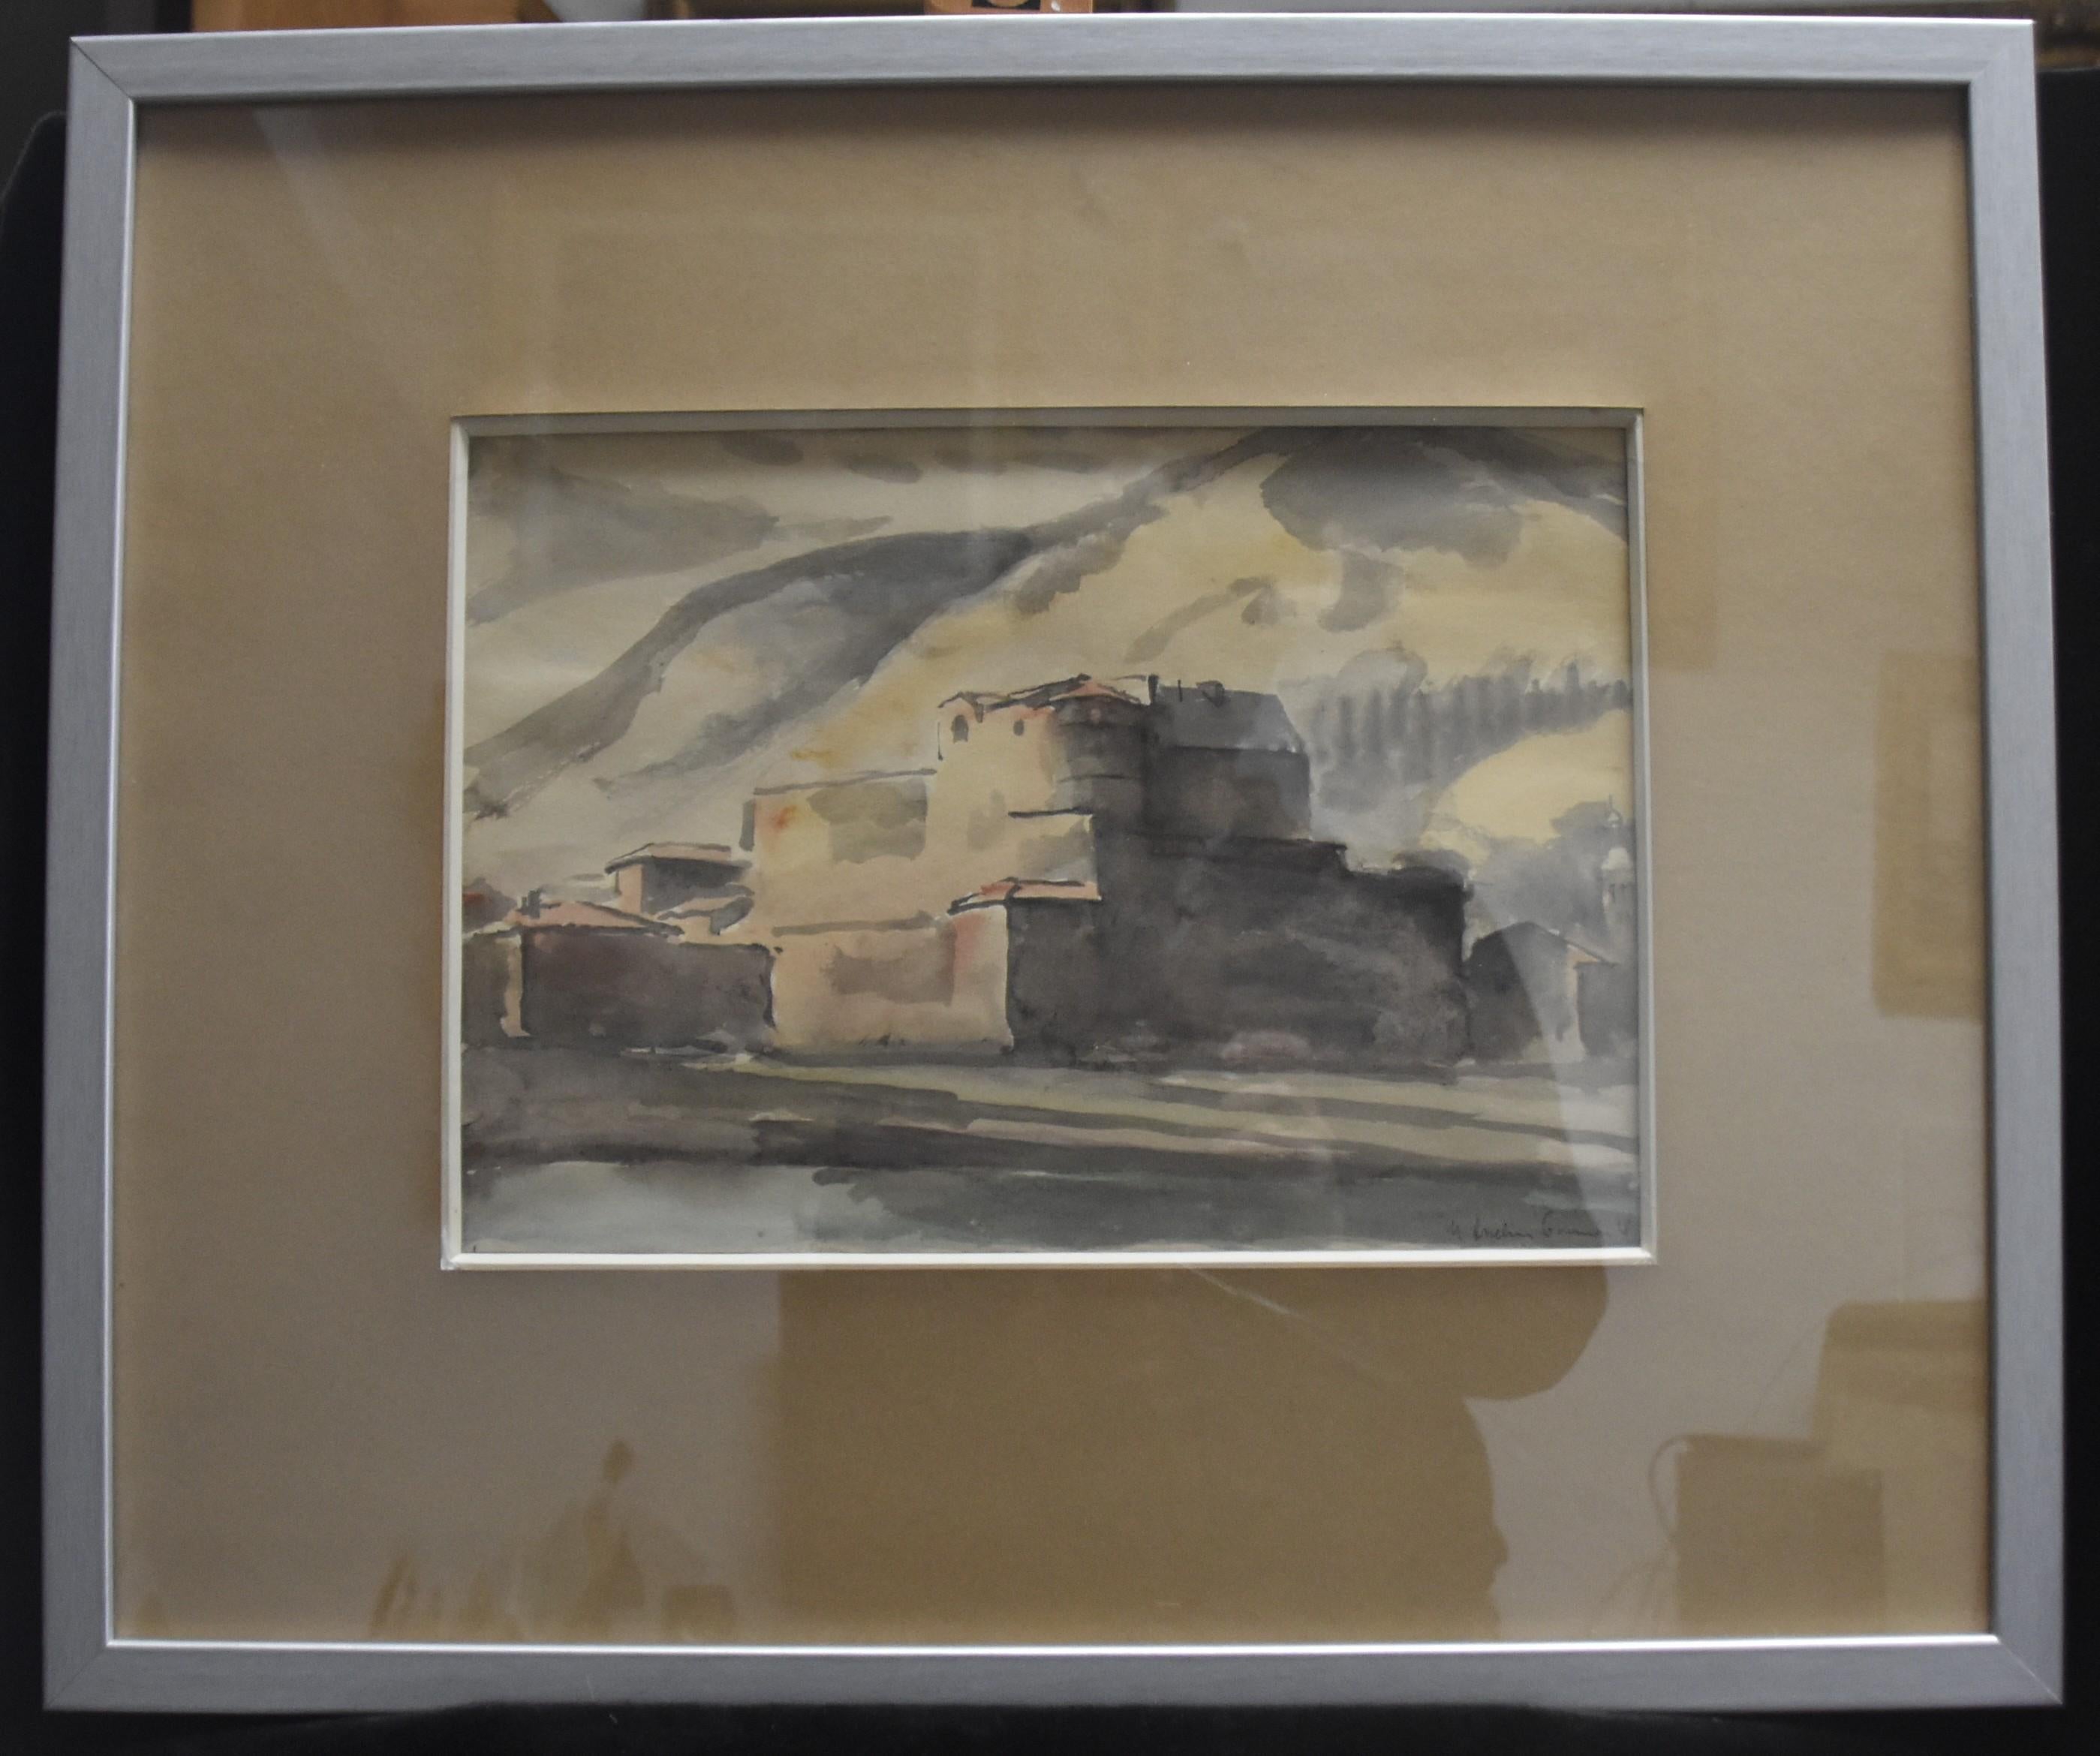 Maurice Asselin (1882-1947) 
Le Chateau de Tournon  (The Castle of Tournon), 1928
signed, dated and titled on the lower right
watercolor on paper
24 x 34 cm
Framed : 49 x 58 cm
Exhibition label on the reverse at the Galerie Charpentier.

Maurice